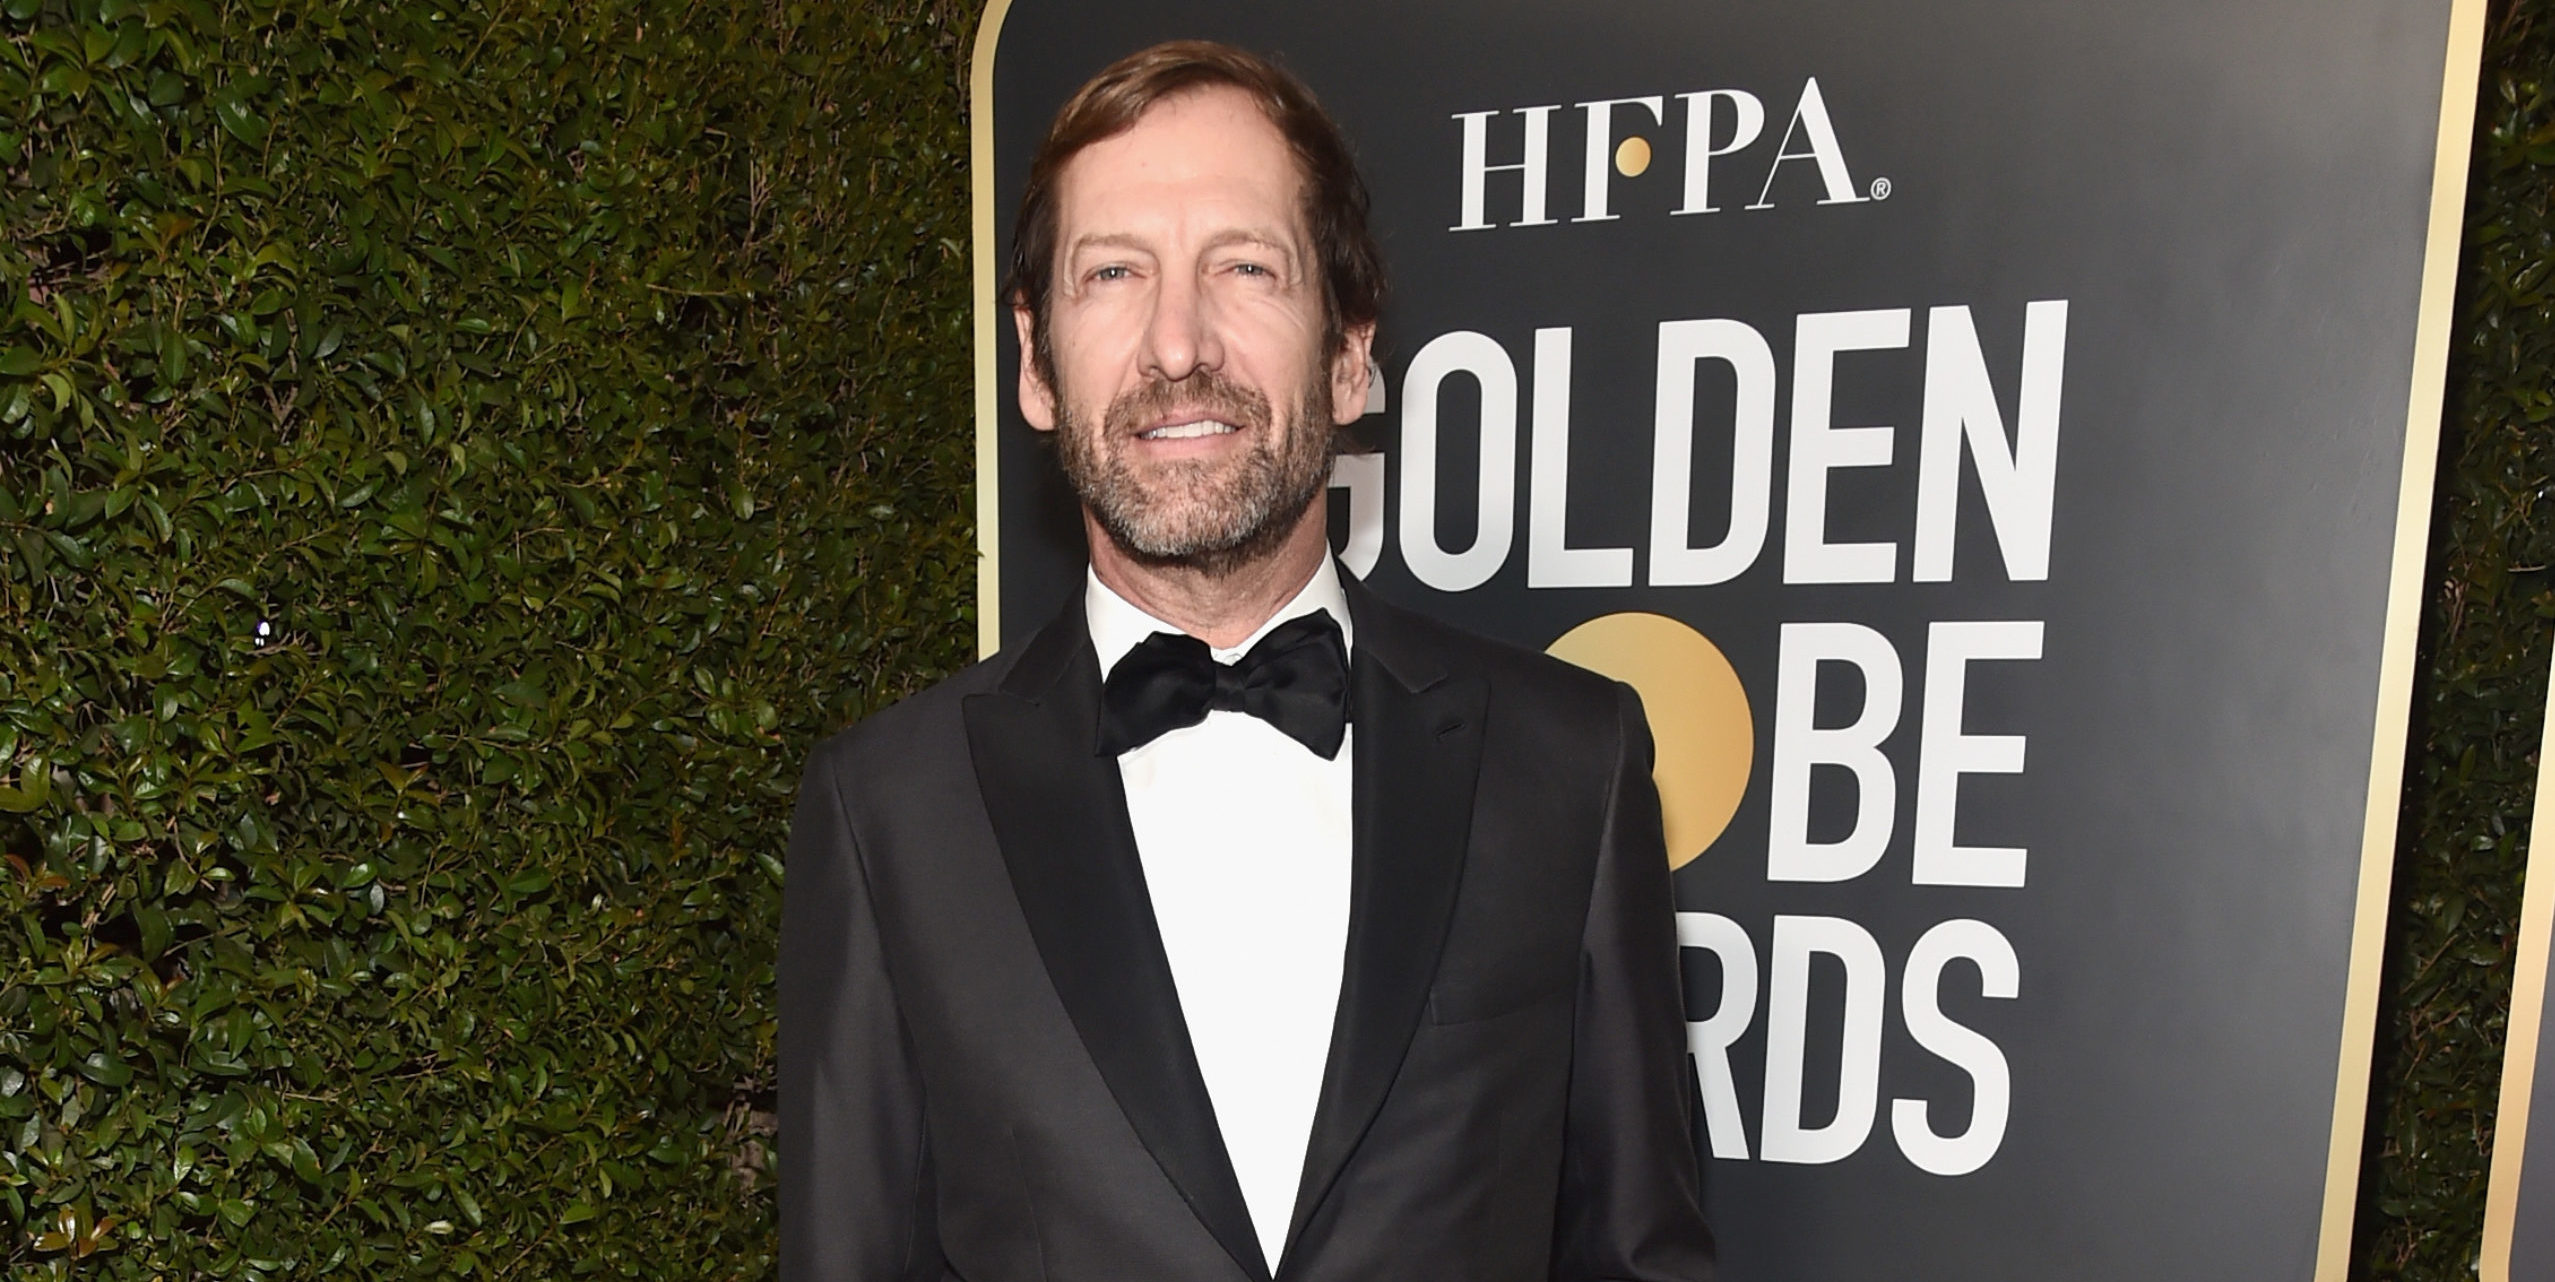 MGM Chairman Kevin Ulrich attends the Golden Globe Awards at The Beverly Hilton Hotel on Jan. 7, 2018 in Beverly Hills, California. (Alberto E. Rodriguez/Getty Images)